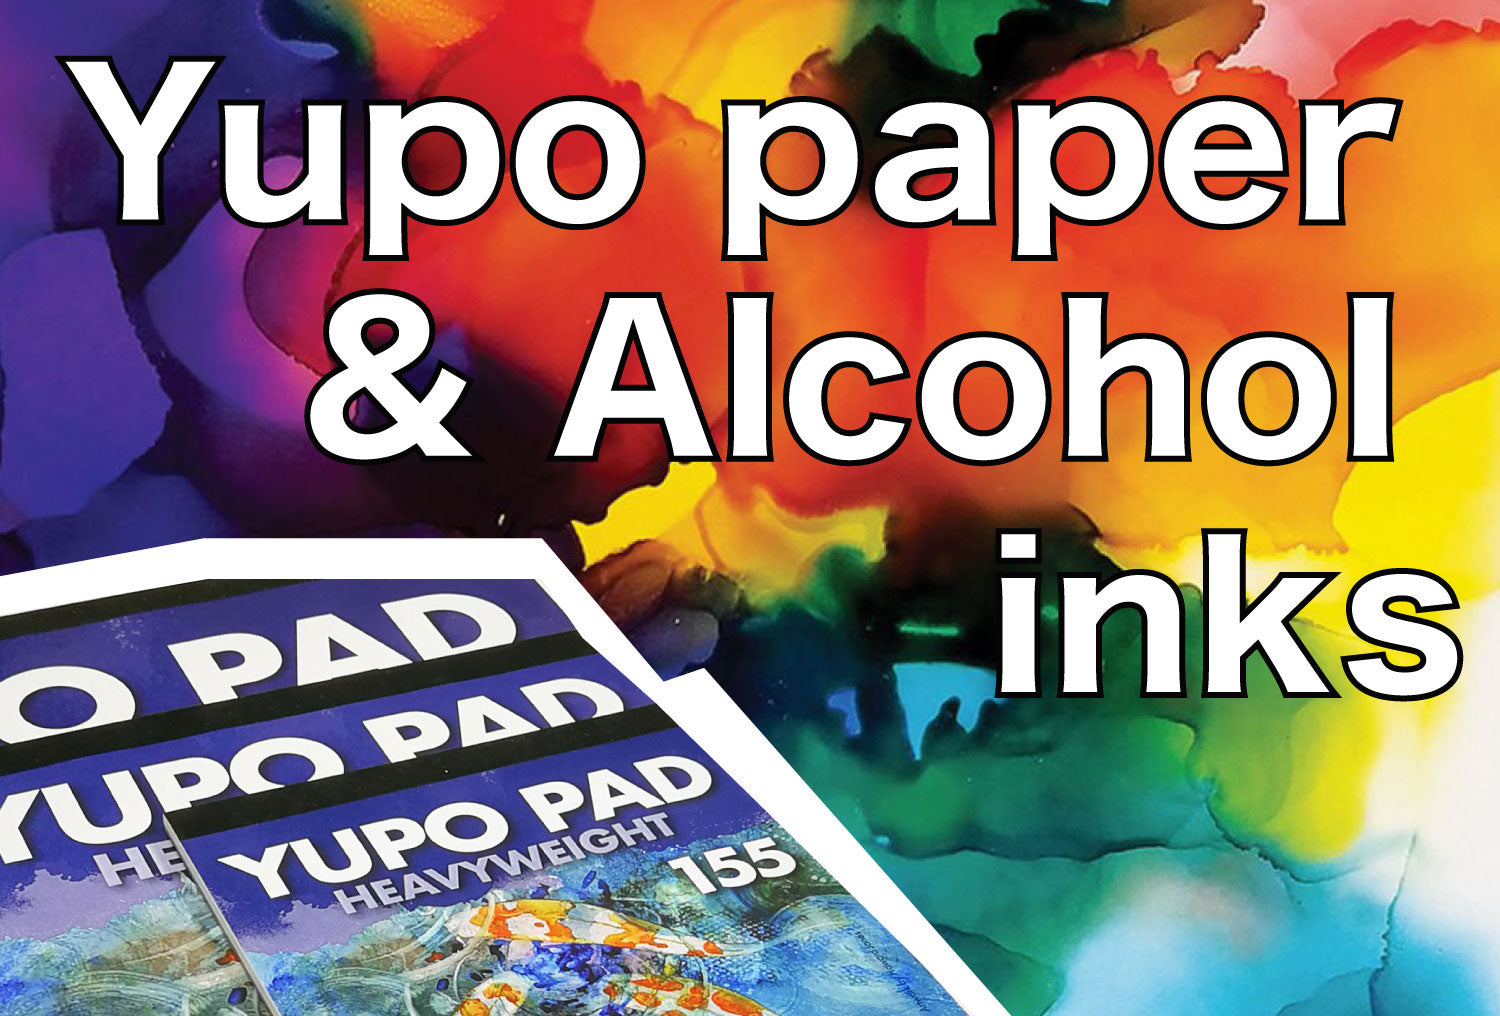 Yupo paper and alcohol ink tutorial.